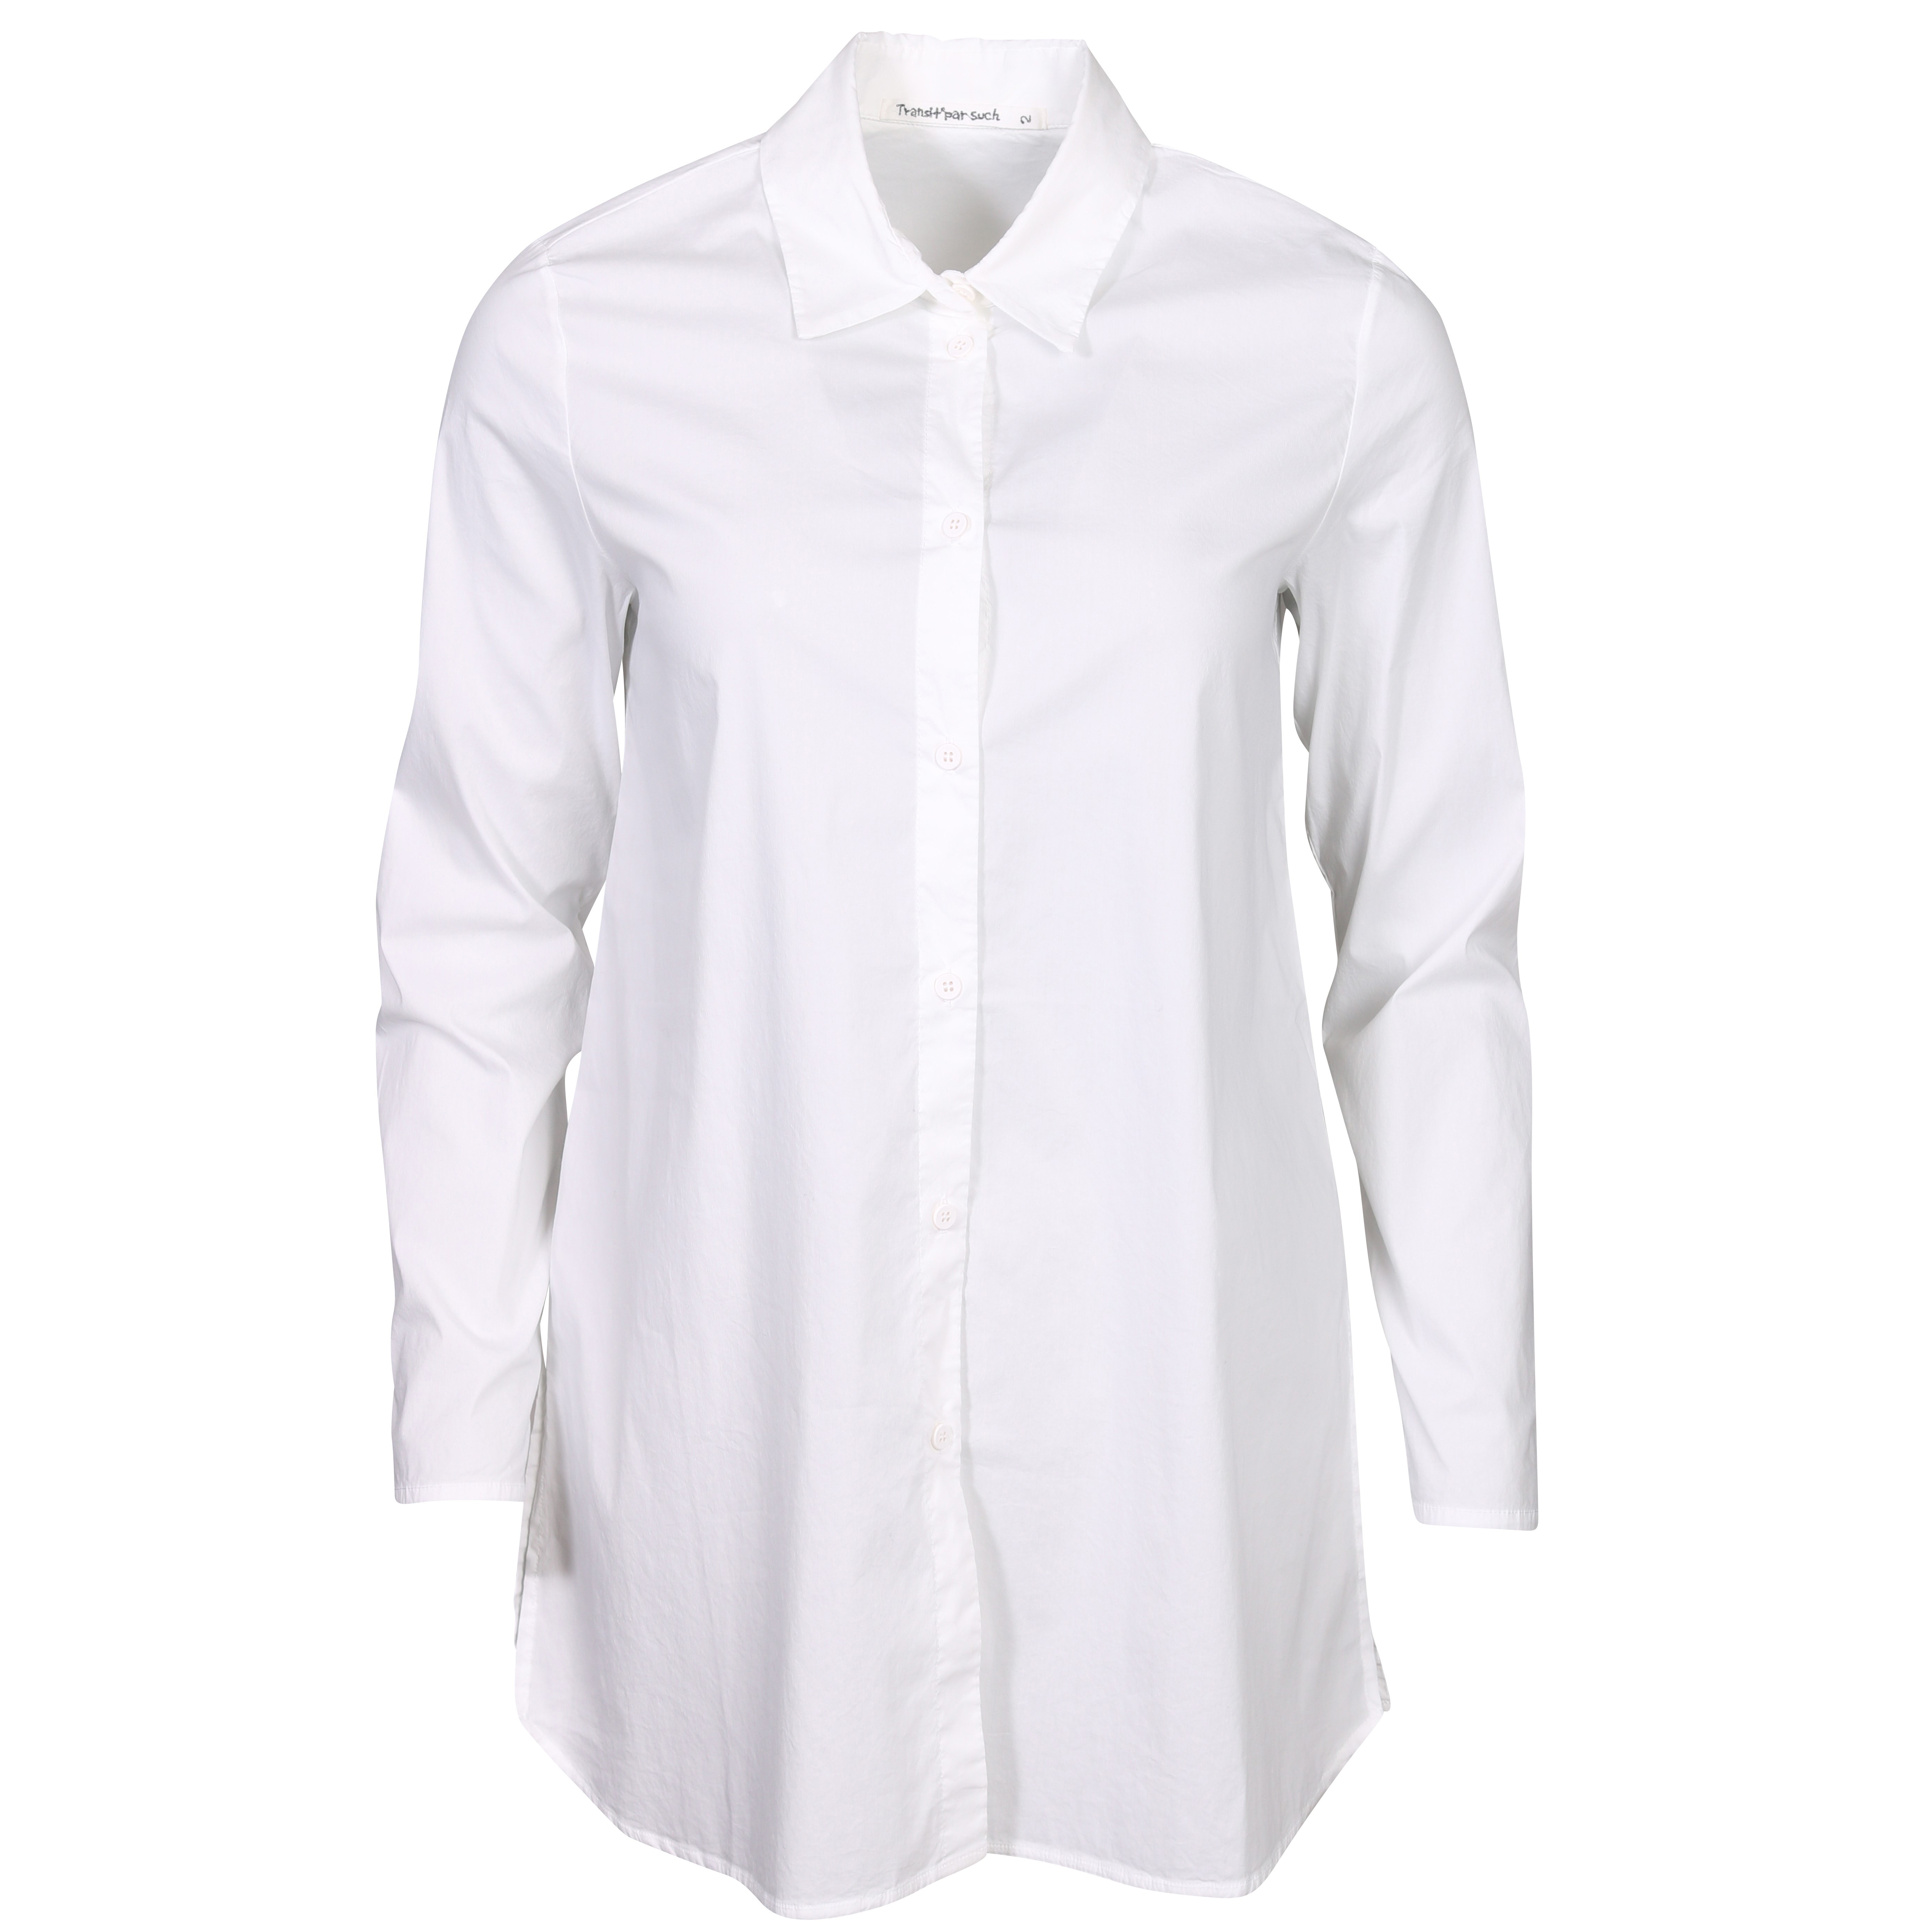 Transit Par Such Blouse in White S